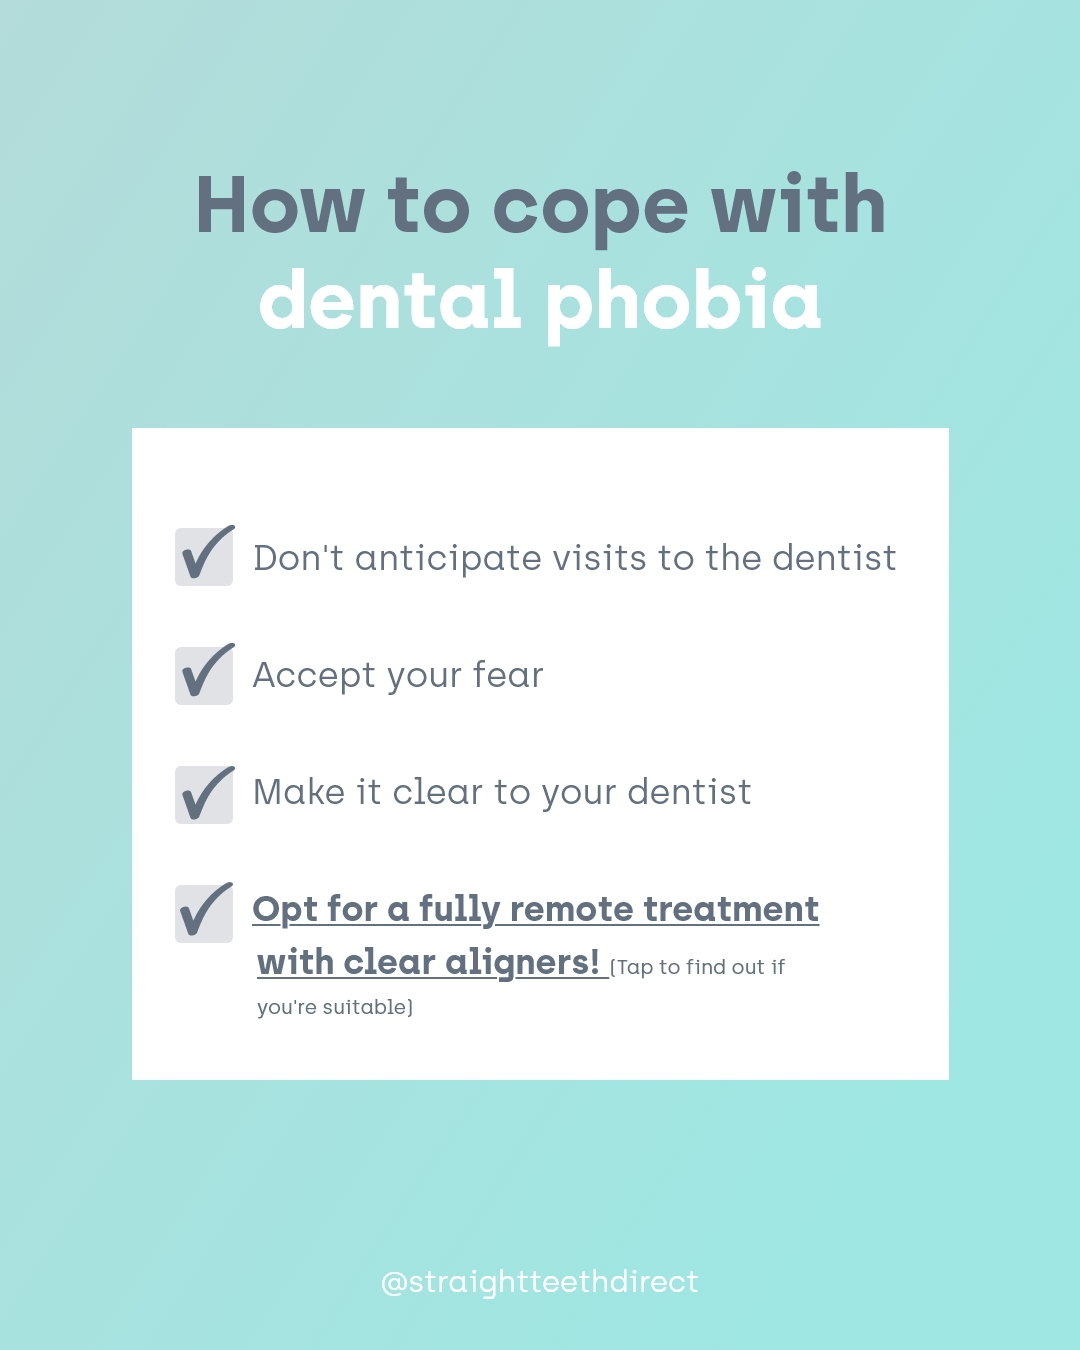 How to cope with dental phobia